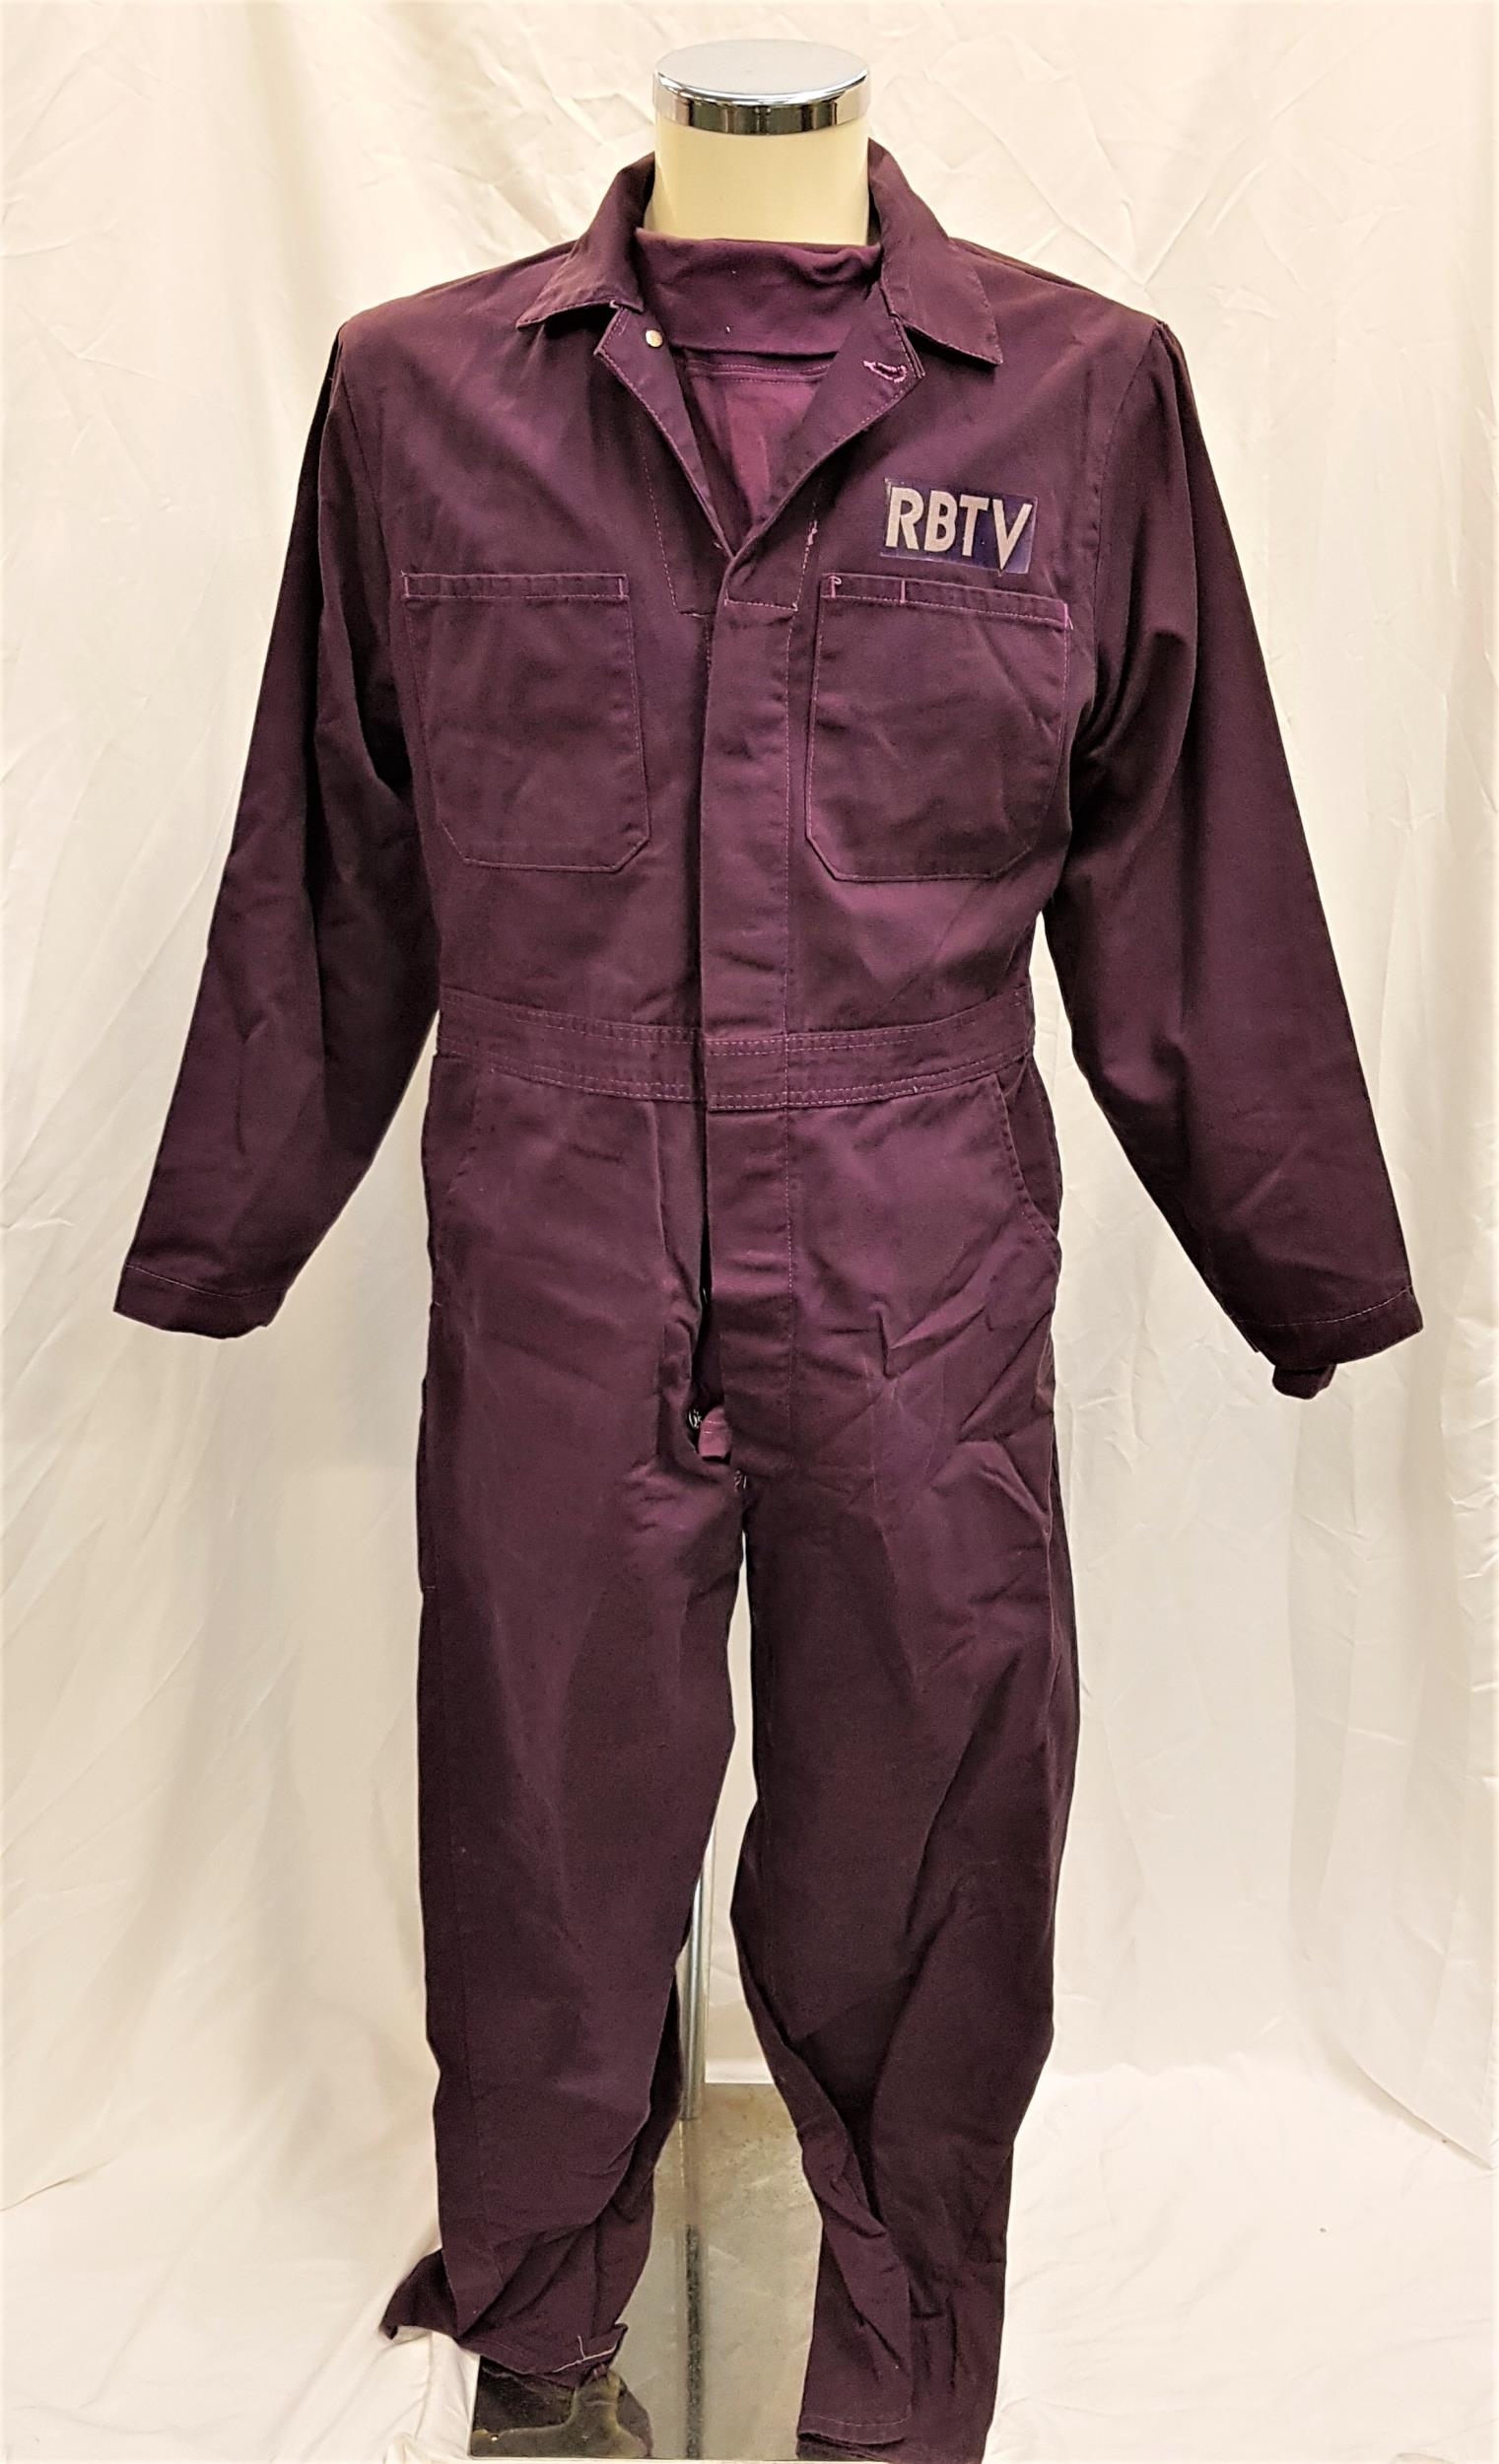 THE ADVENTURES OF ROCKY & BULLWINKLE (2000) - RBTV JUMPSUIT AND SHIRT Gents 100% cotton, purple died